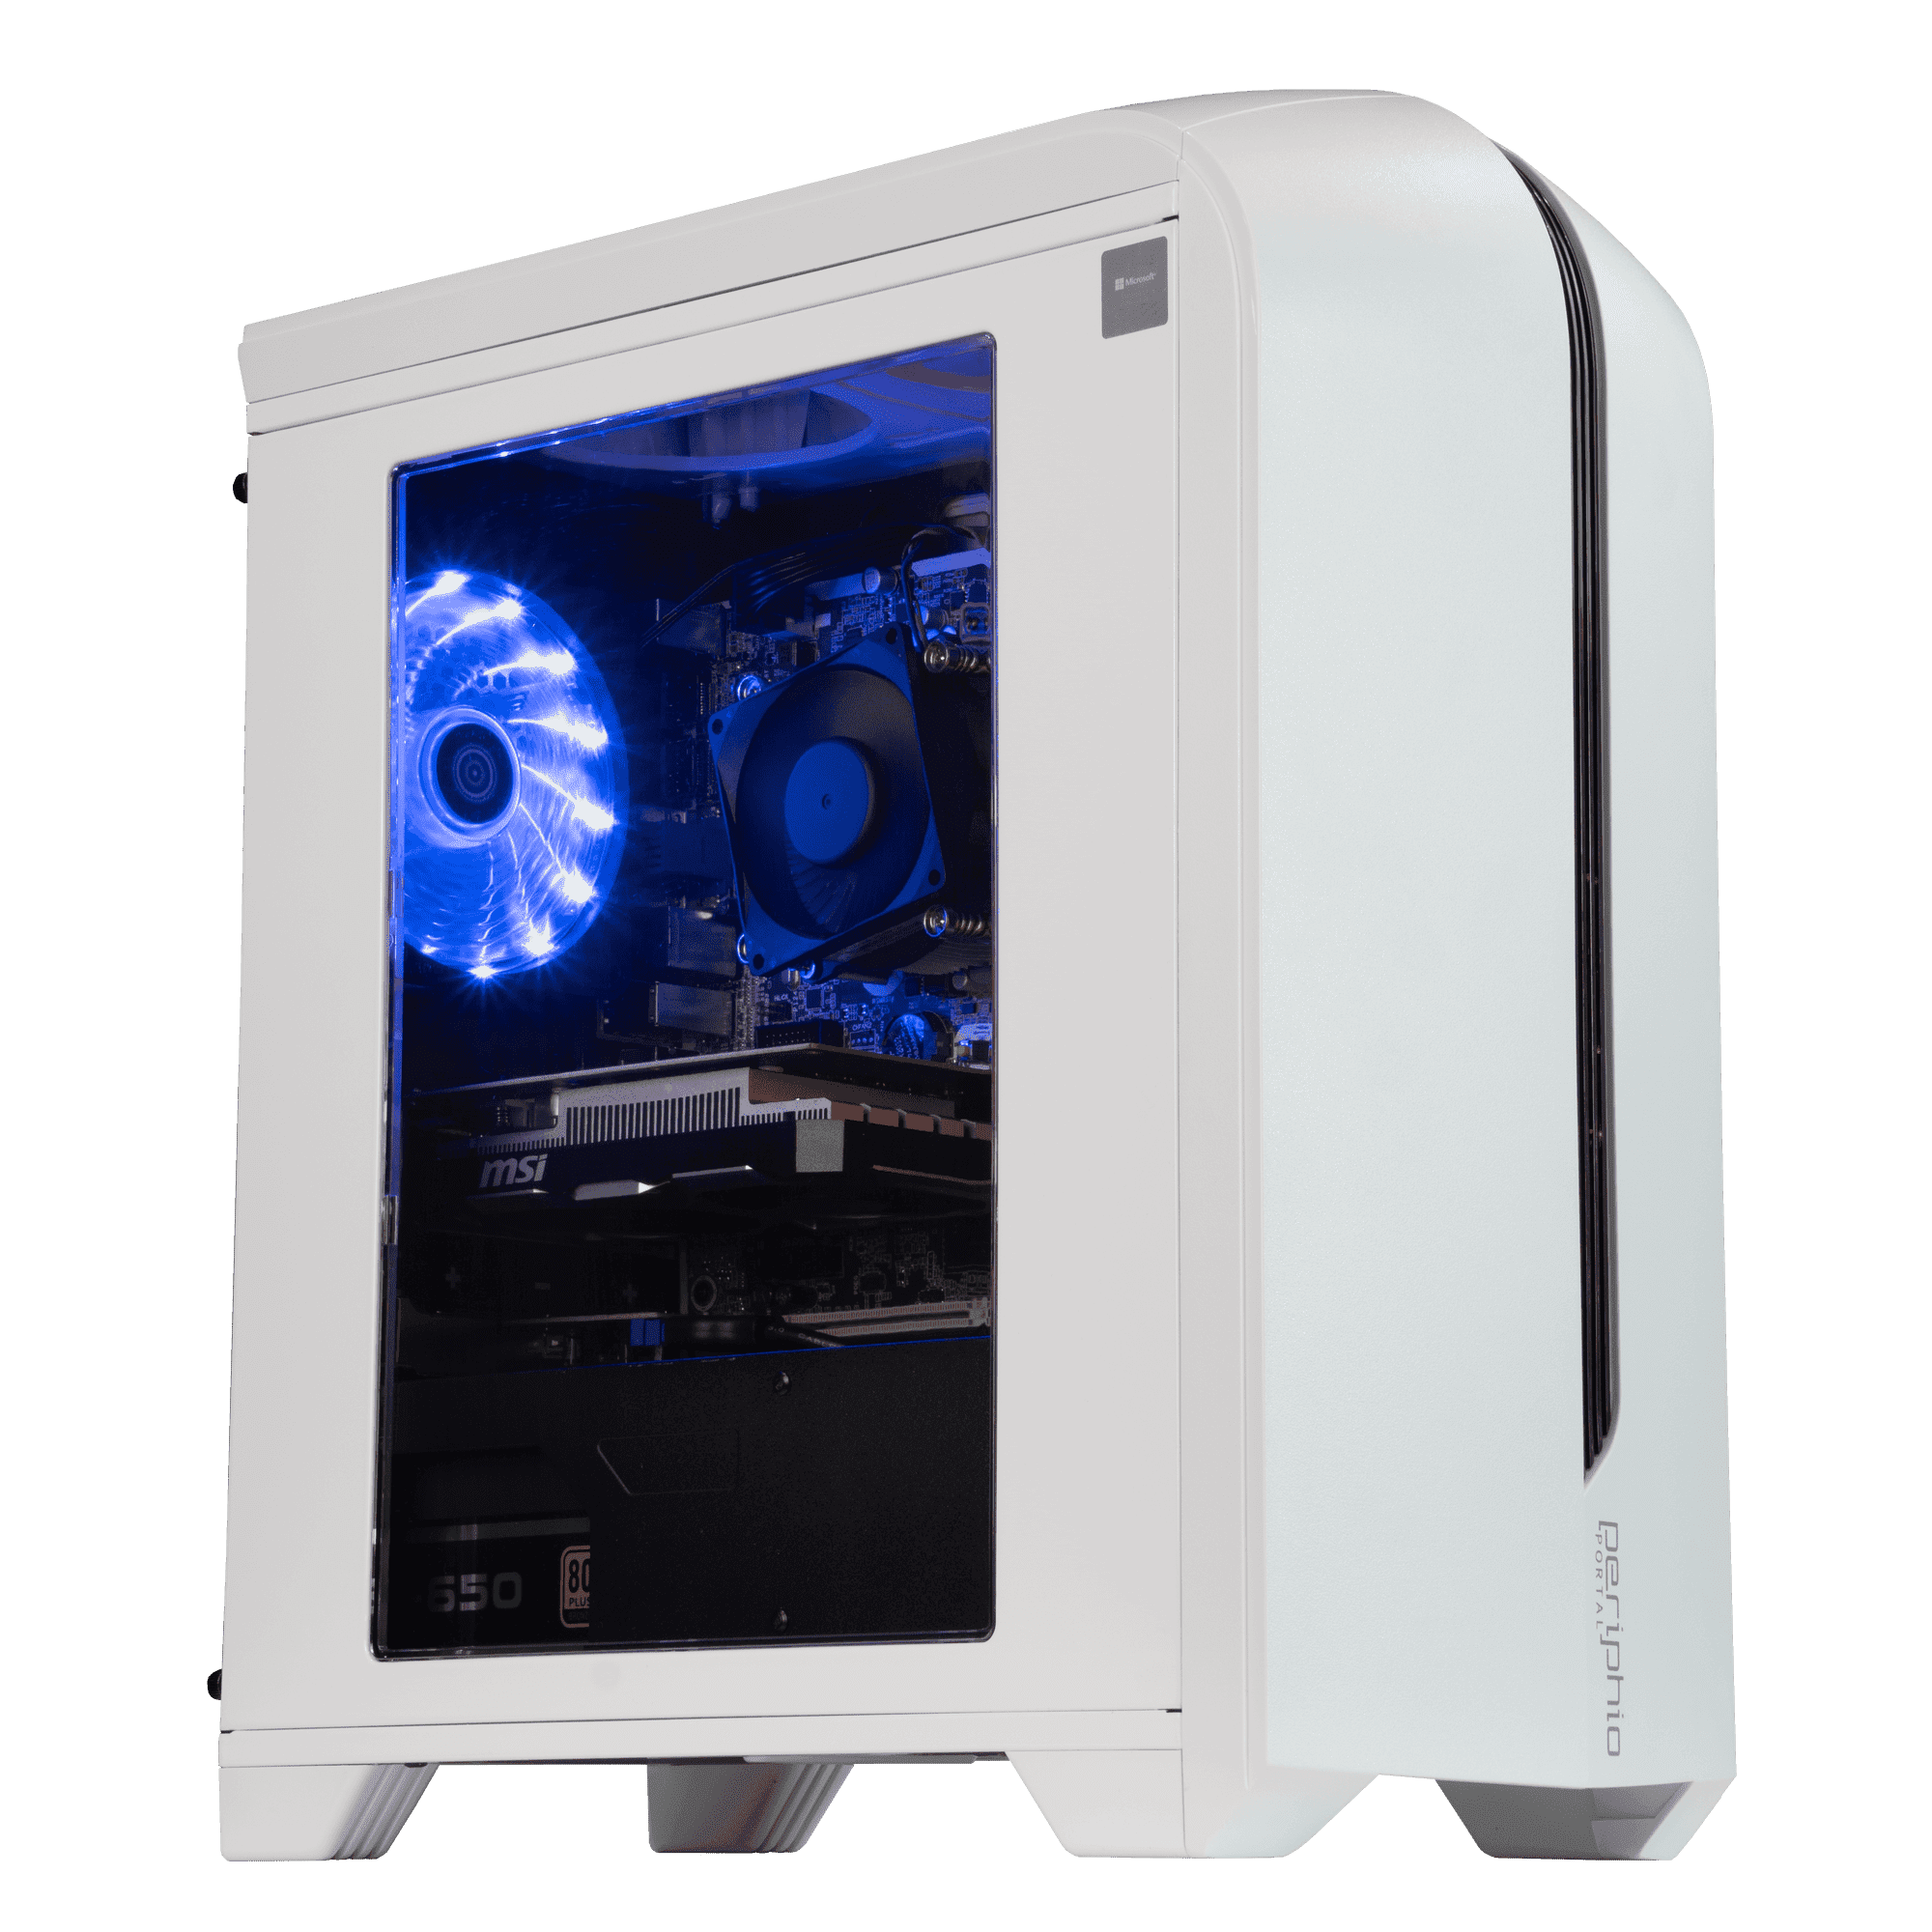 Periphio Citadel | Powered by the GeForce RTX 3060 Ti | Prebuilt Mid-Range  VR Ready Gaming PC | Fortress Series (New)